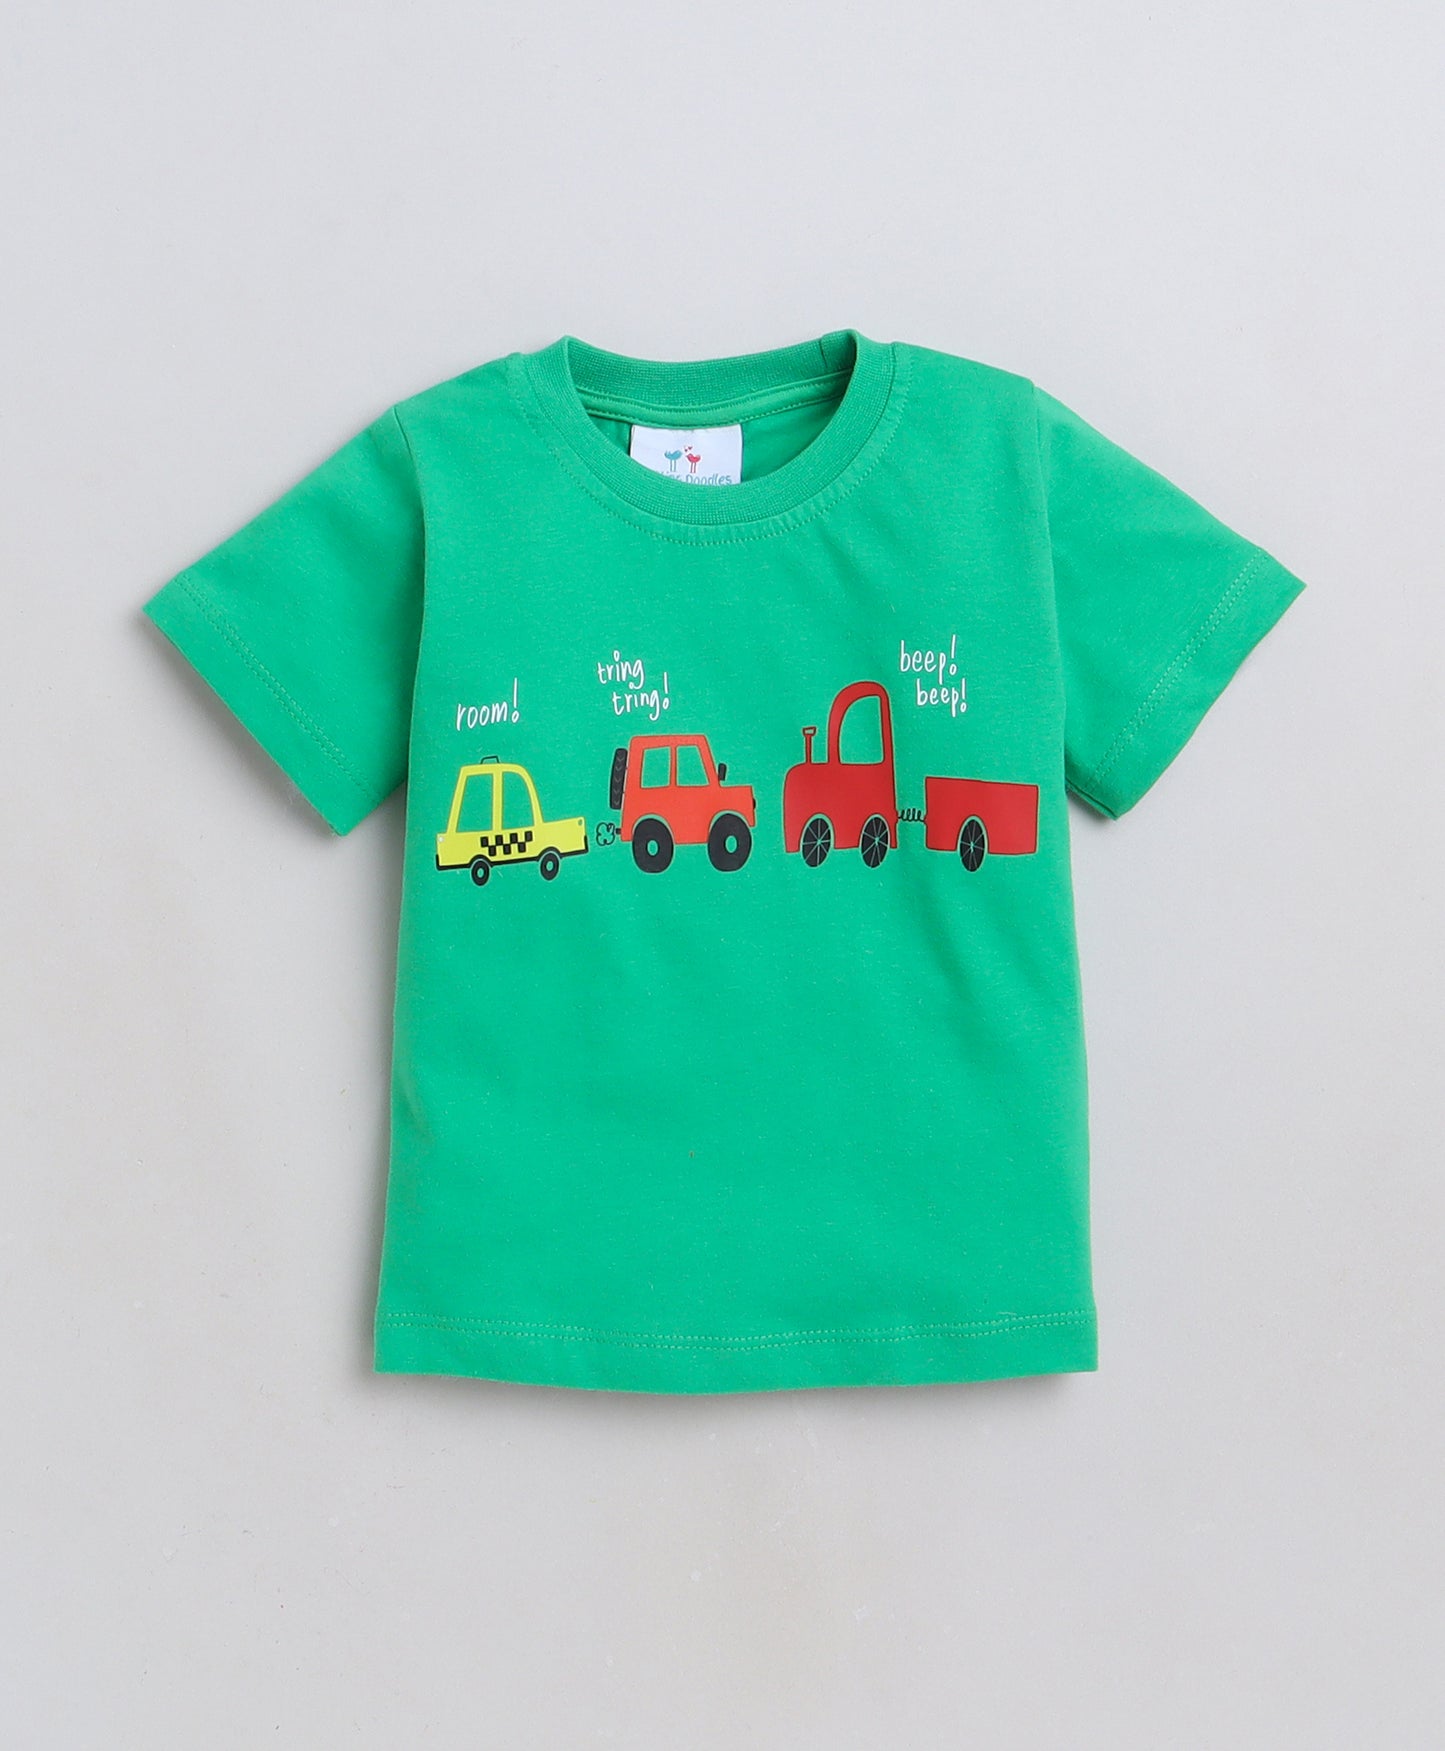 Knitting Doodles Premium Cotton Kids' Night suit with Cars print t-shirt and Pyjama- Green and White